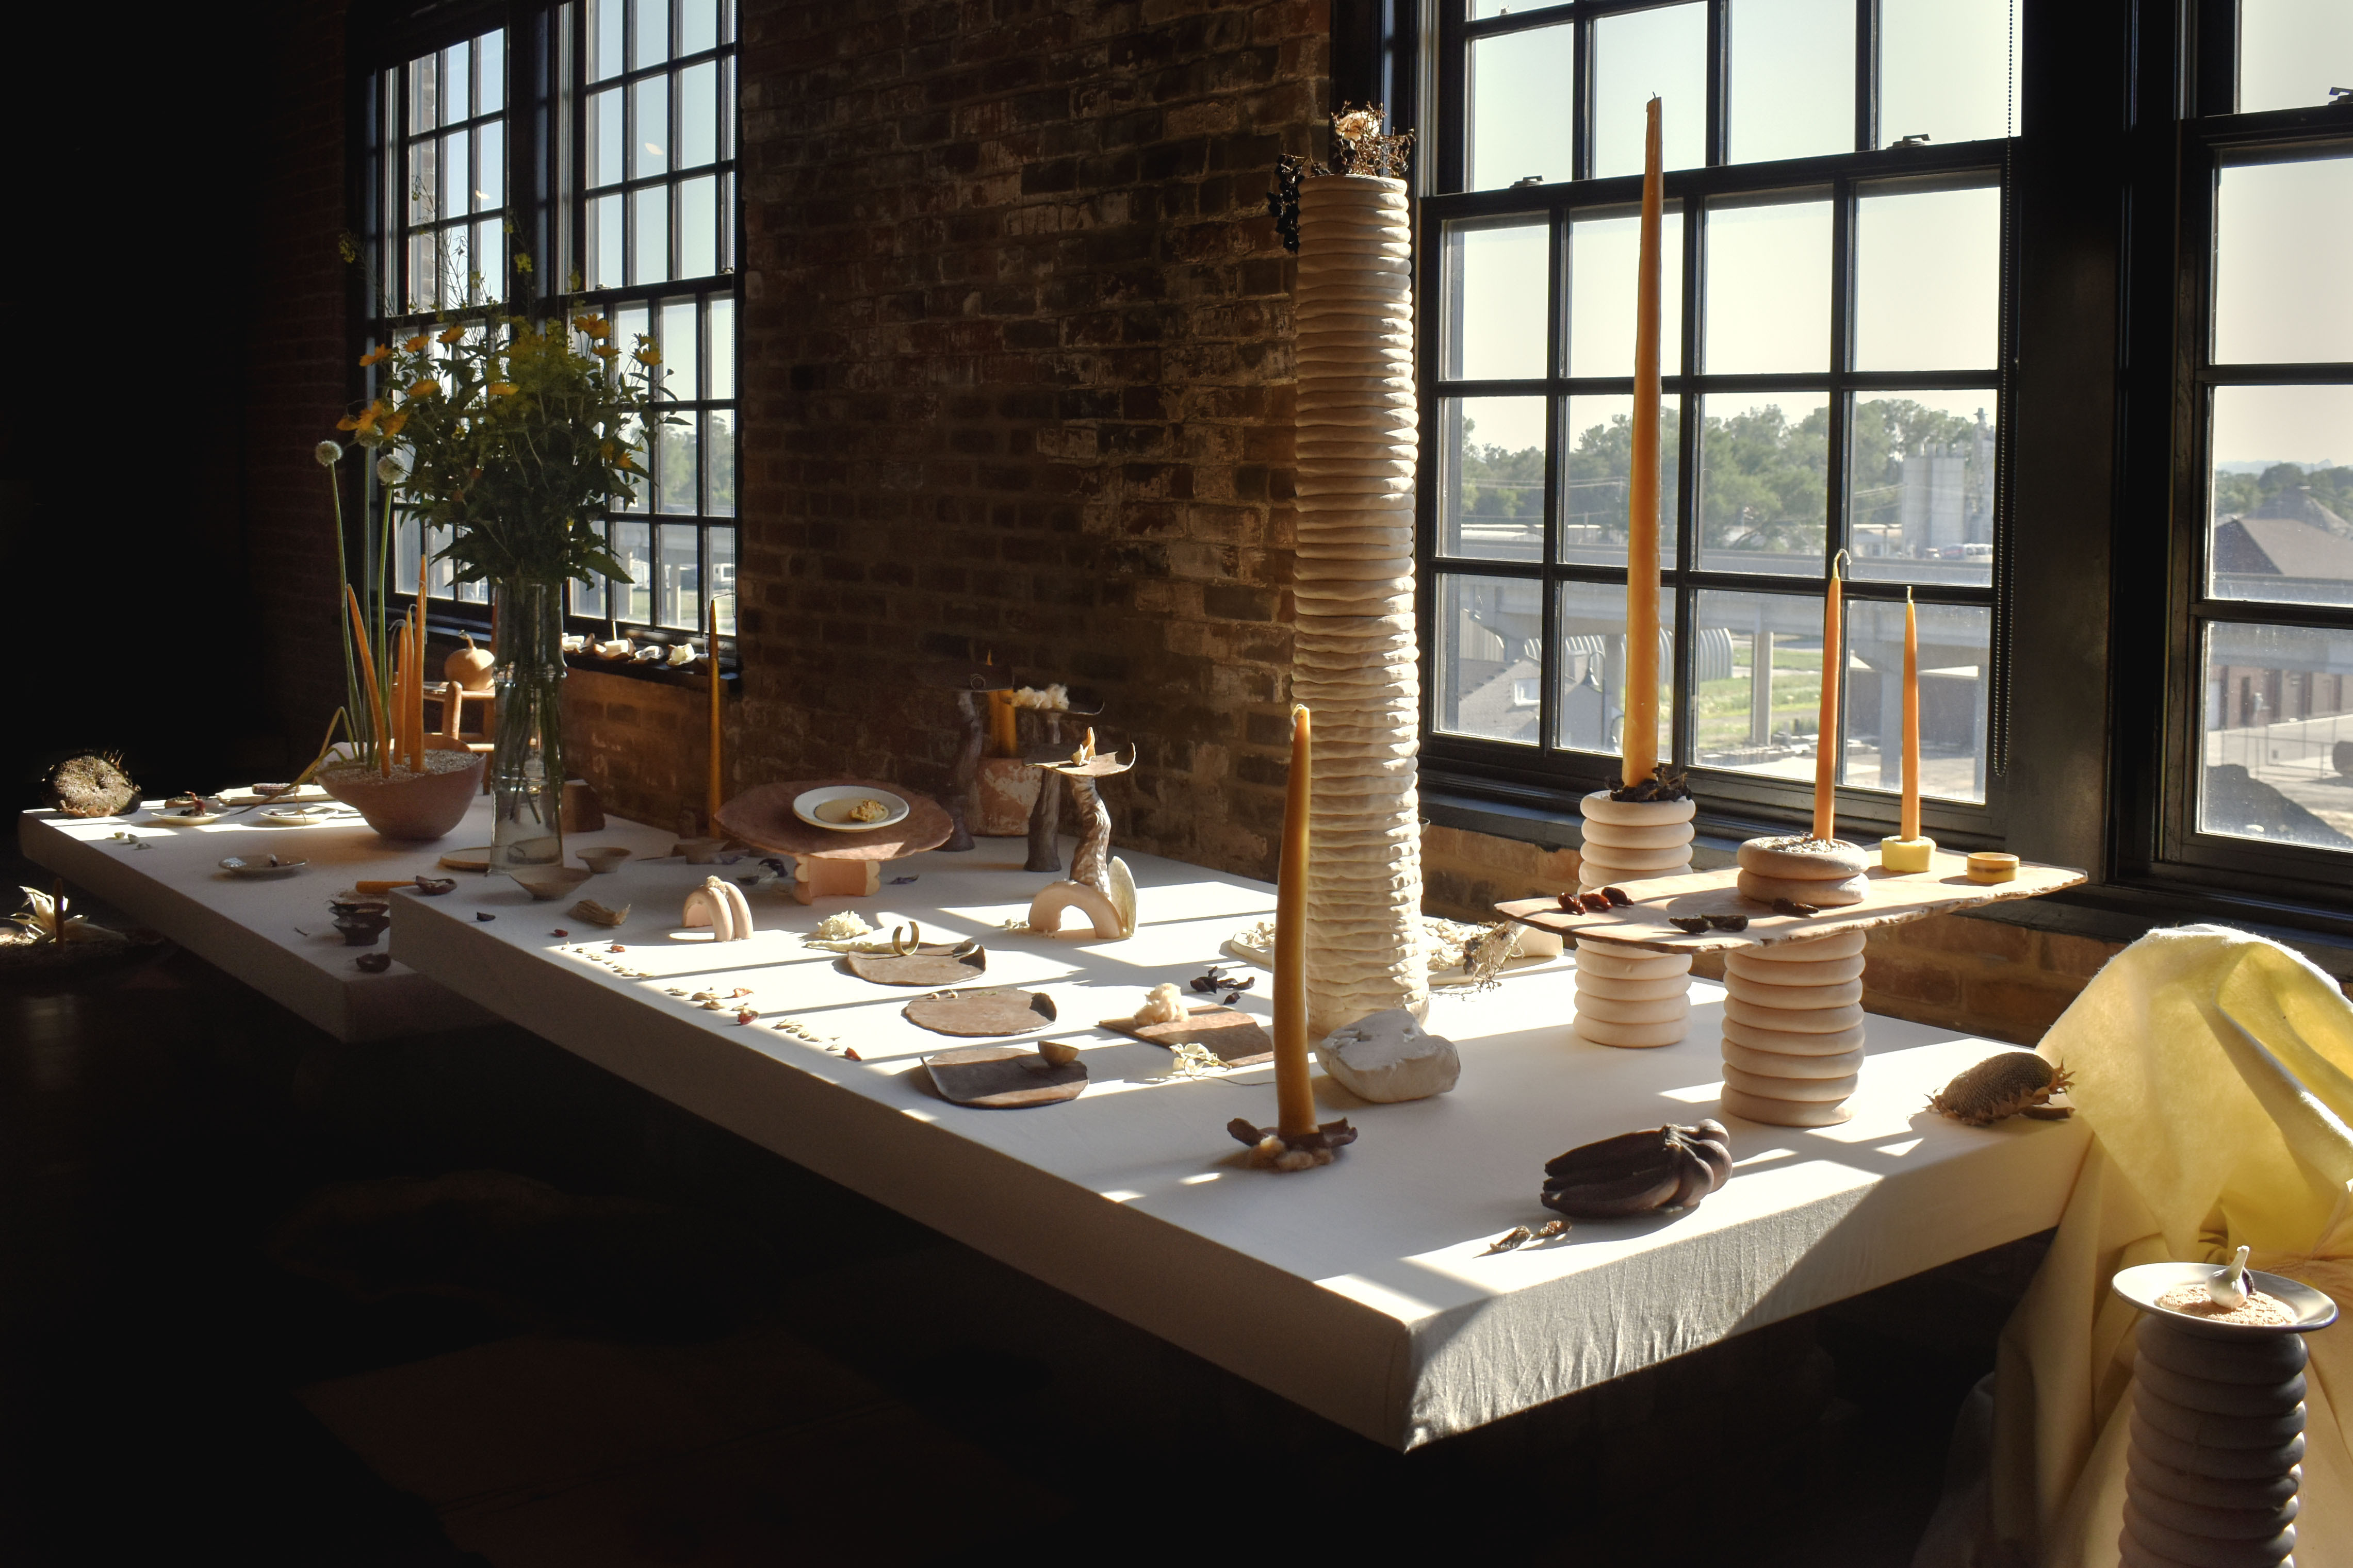 Tall candle sticks and scultural art sit on a table while warm sunlight spills across the scene from a nearby window